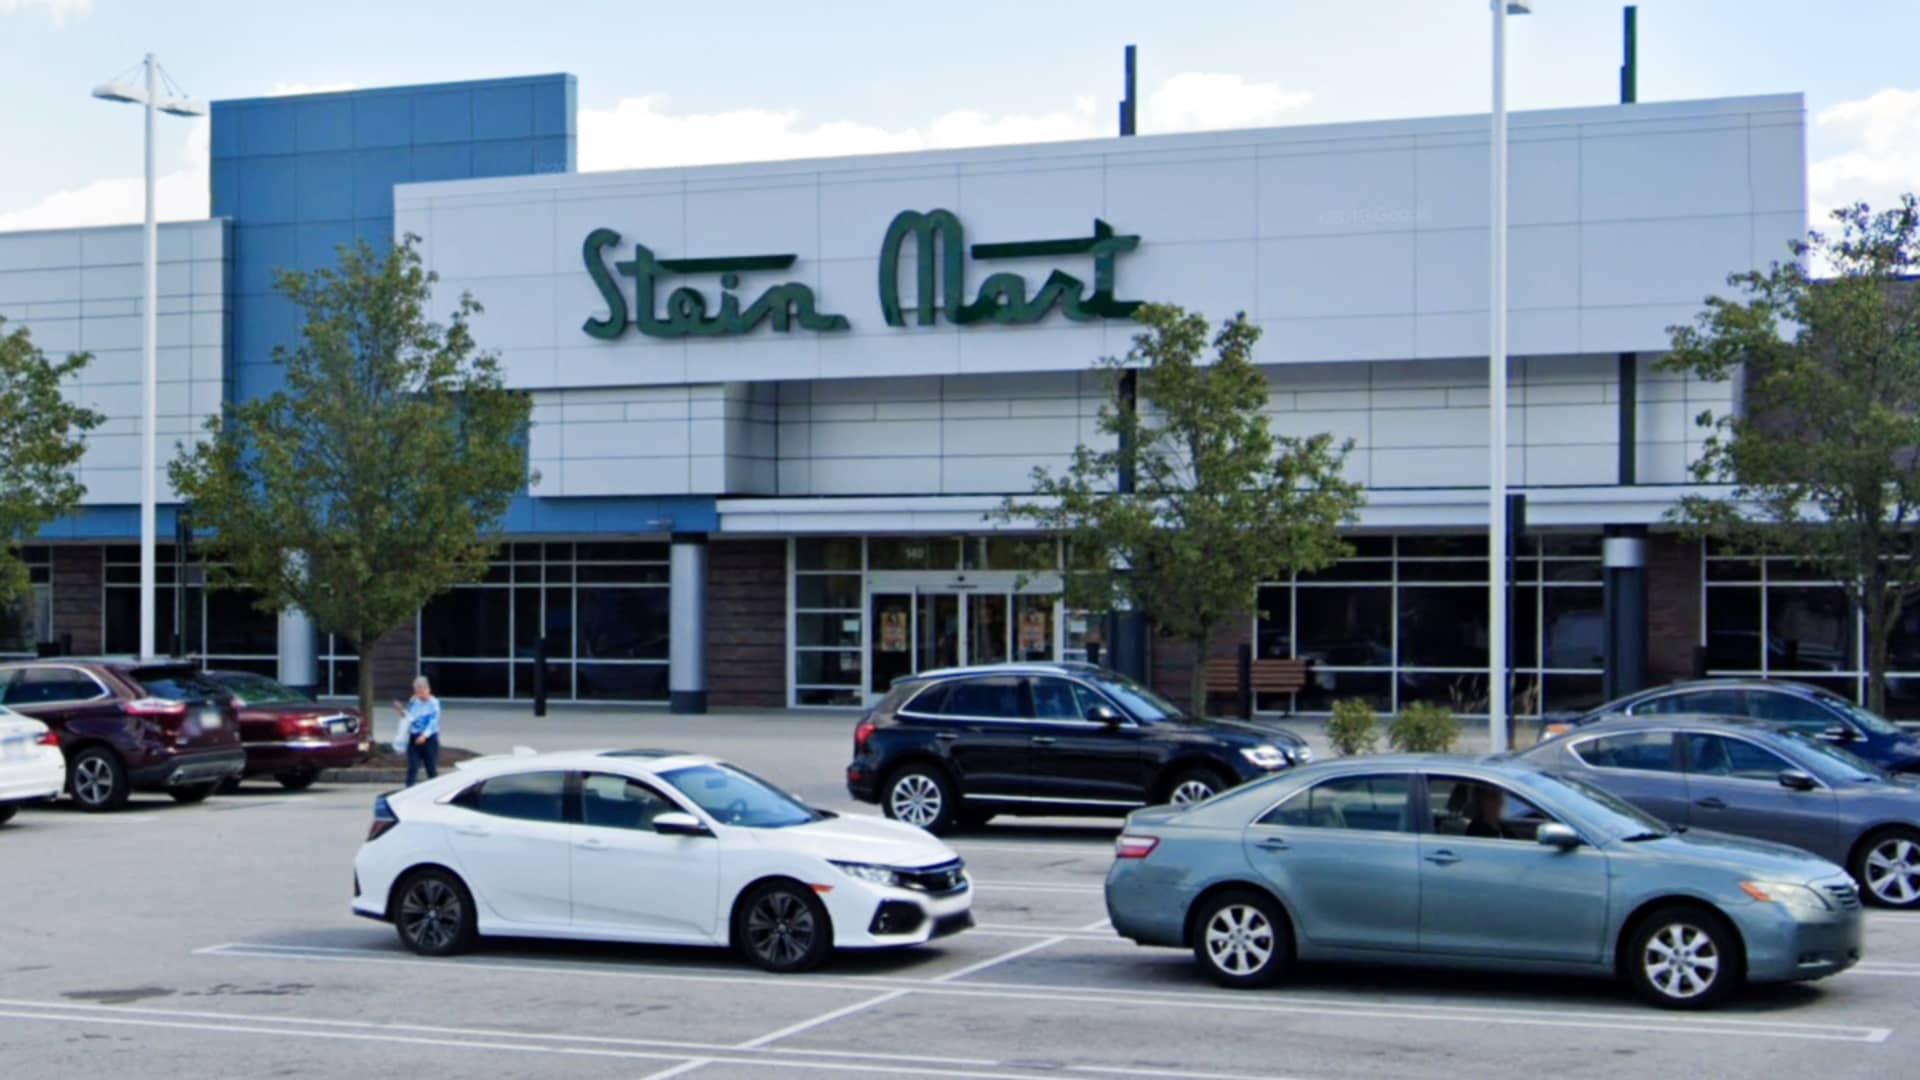 A Stein Mart store in King of Prussia, PA.